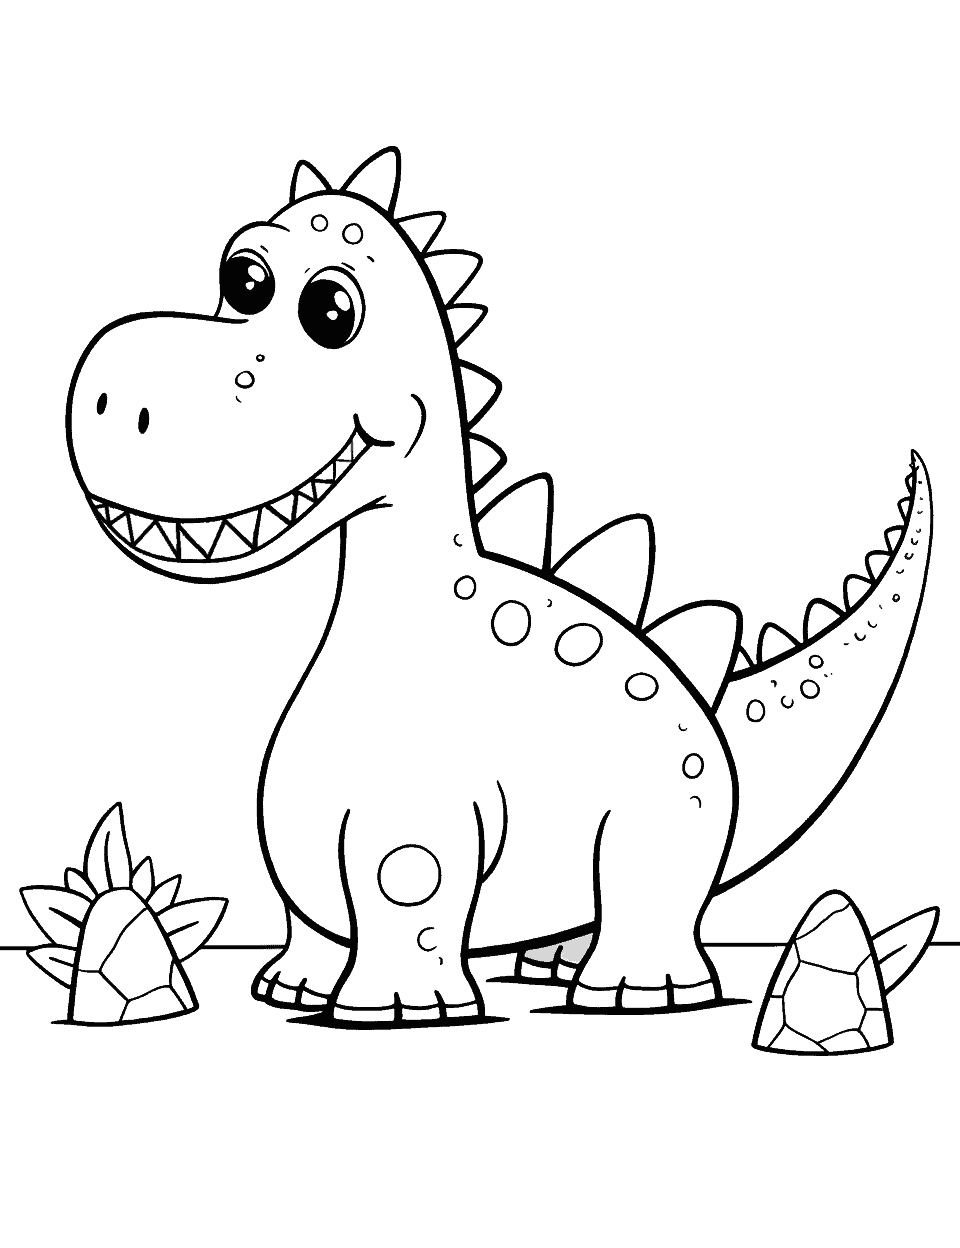 Easy Dino Shapes Coloring Page - Simple, basic shapes forming a cute dinosaur for beginners.